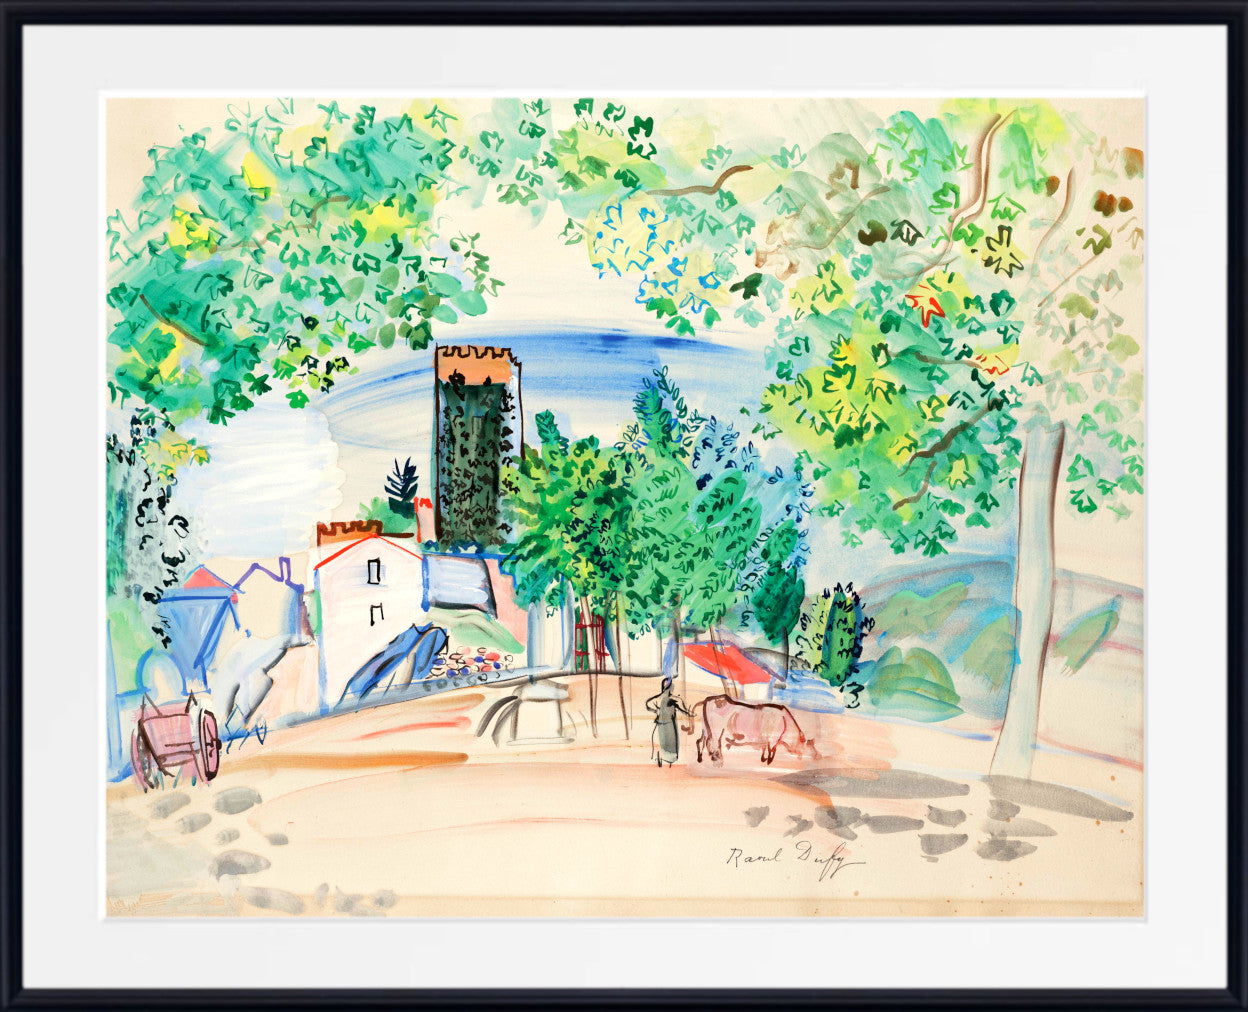 View of the Tower of Vernet-les-Bains (circa 1941) by Raoul Dufy